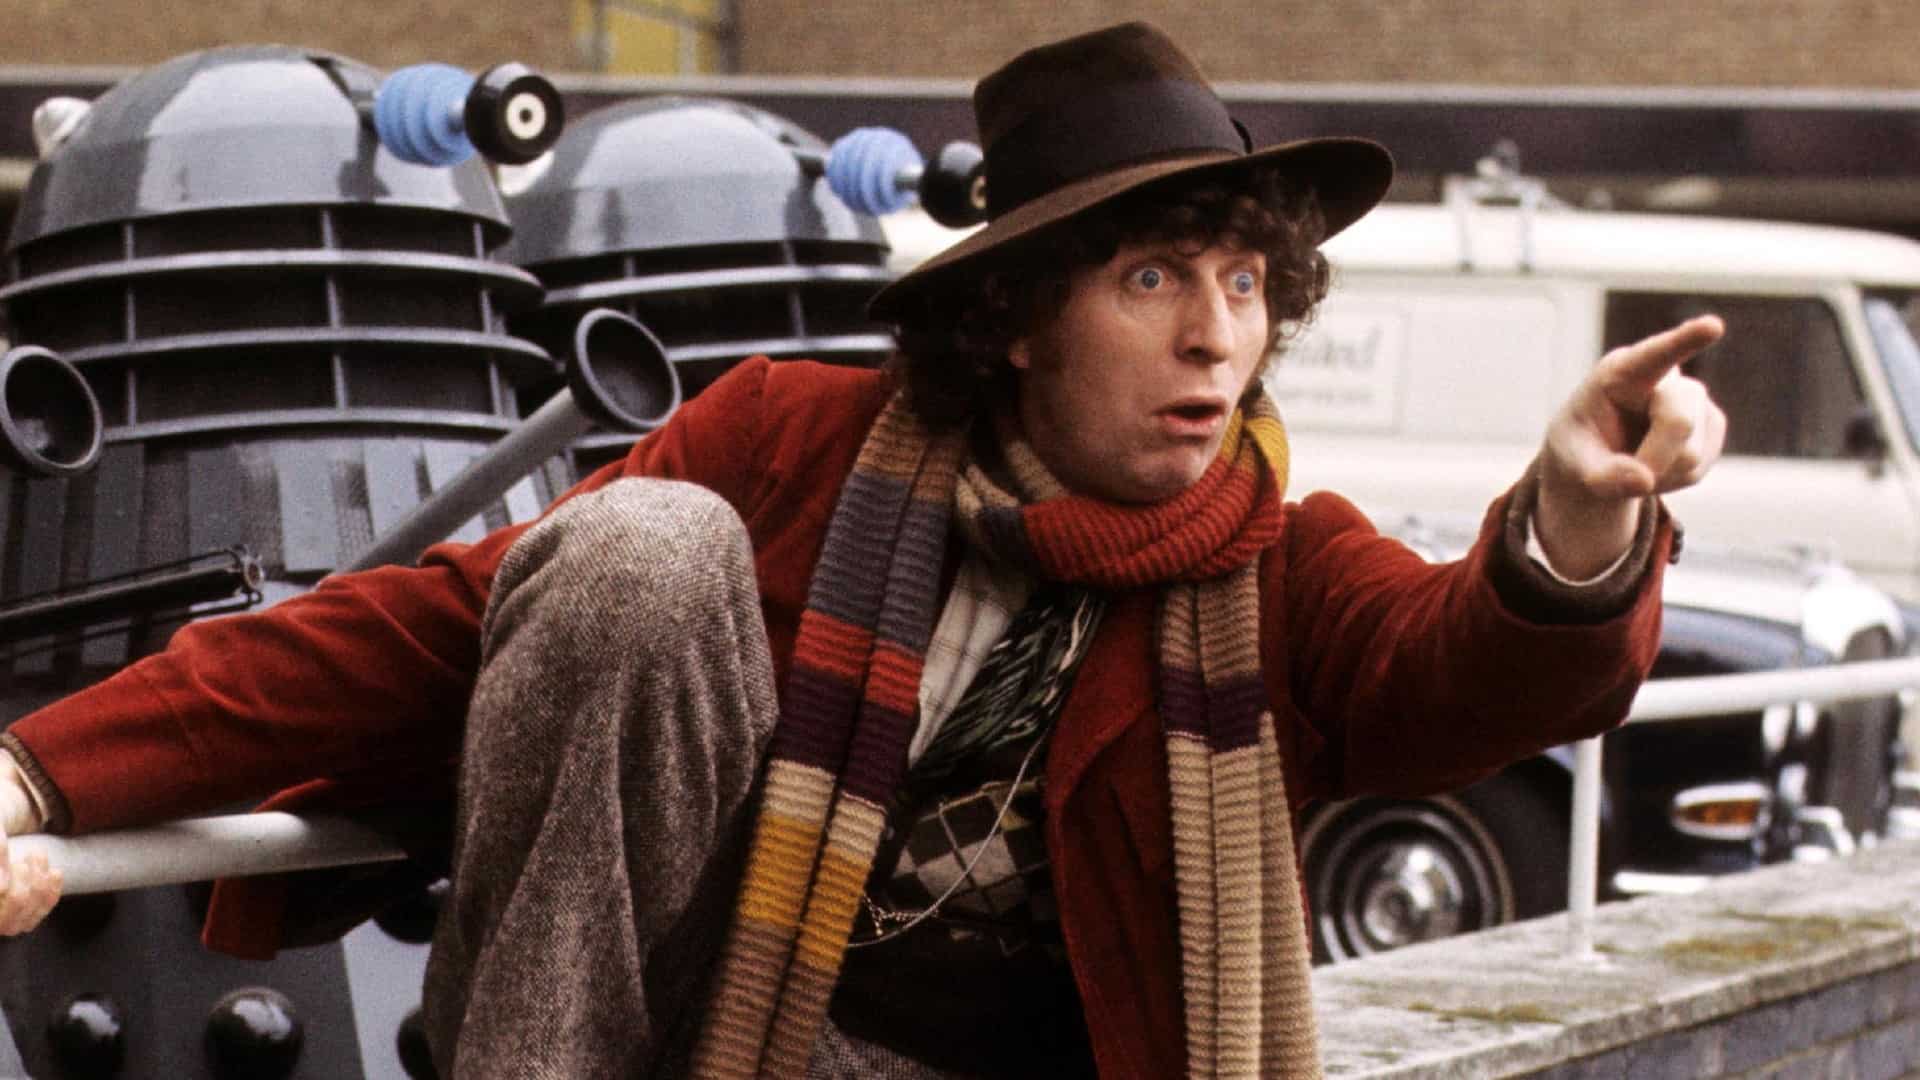 A man in a parking lot with Daleks in this photo from British Broadcasting Corporation.